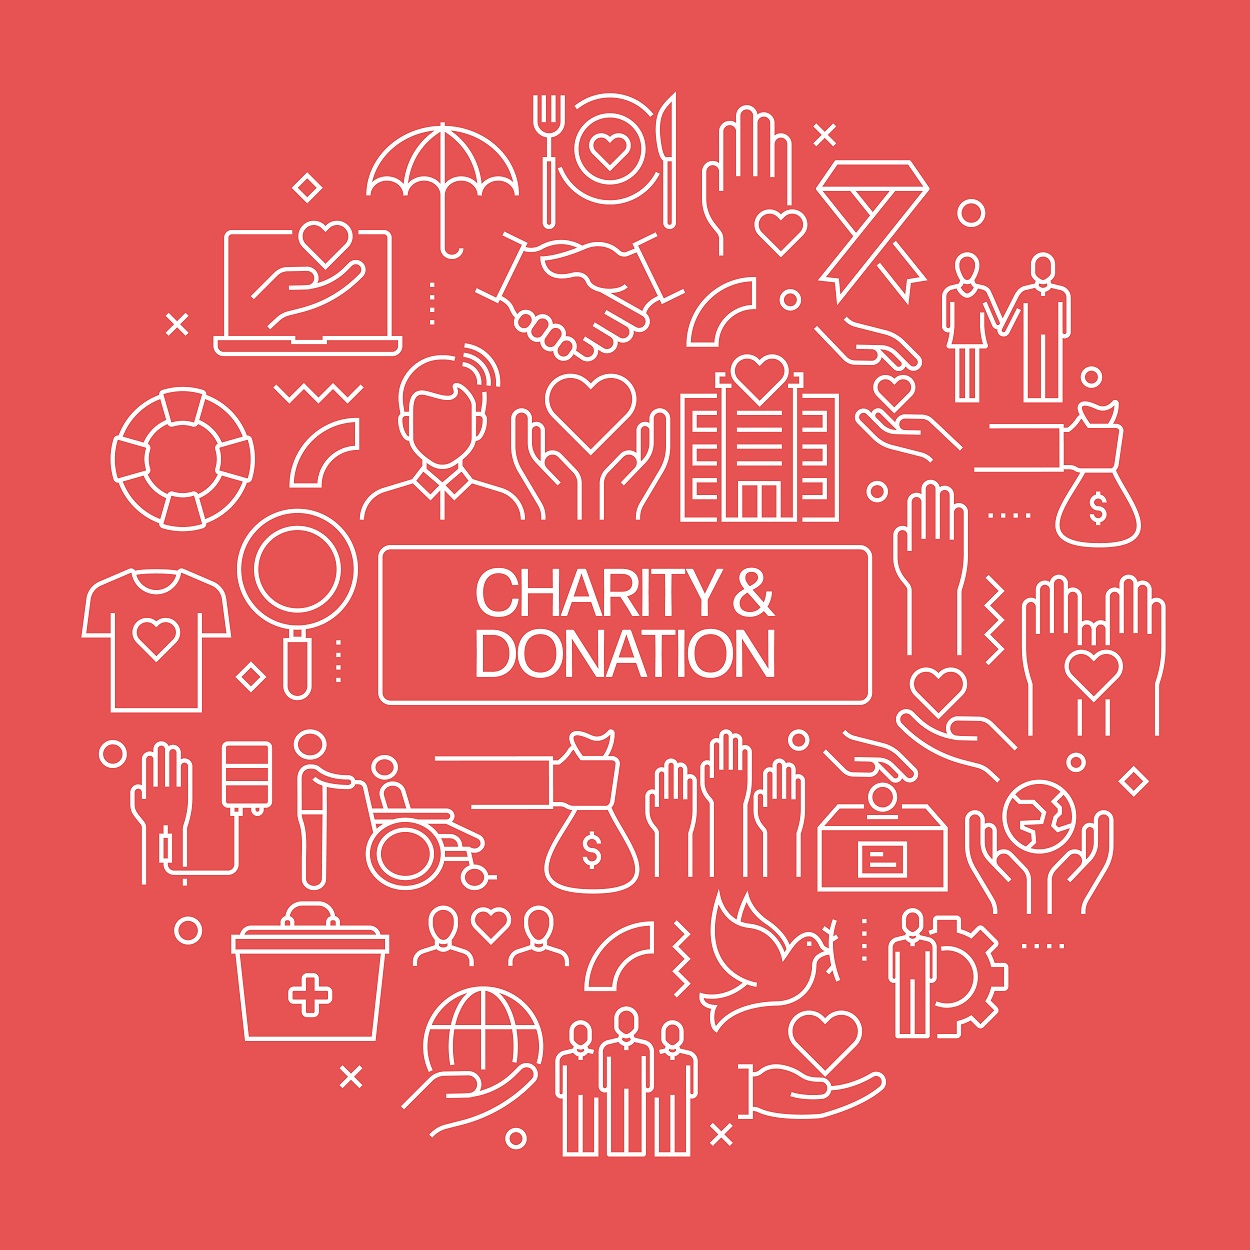 CHARITY AND DONATION Web Banner with Linear Icons, Trendy Linear Style Vector